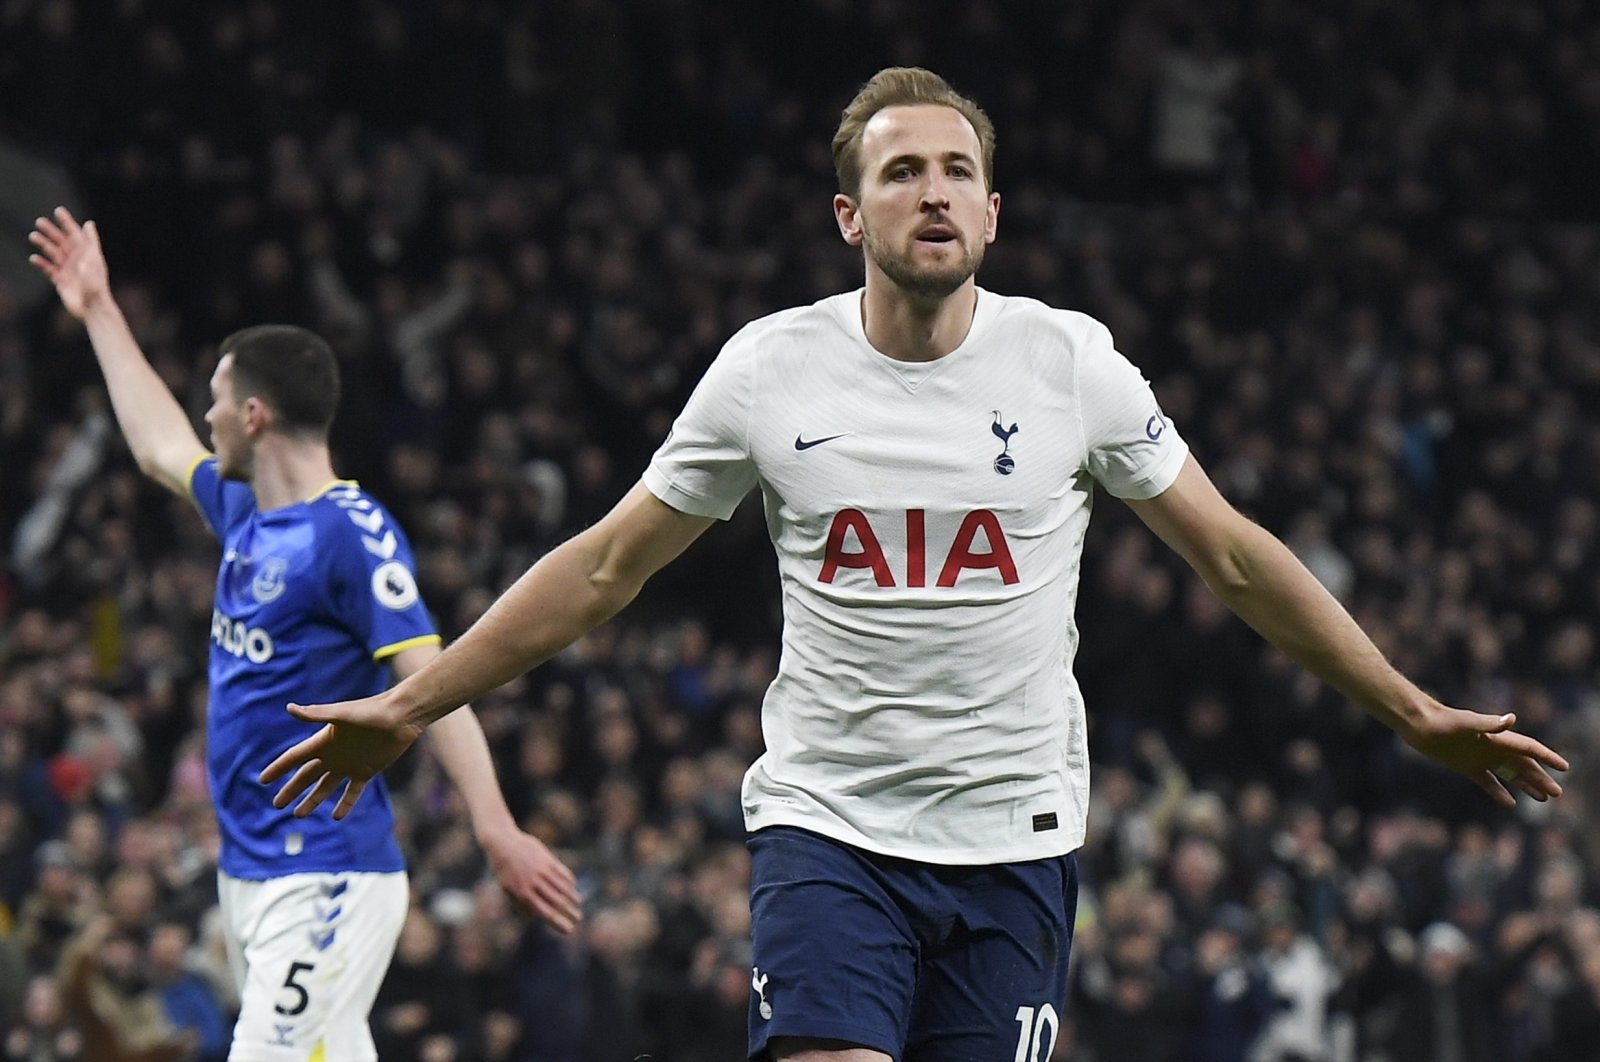 Suprs&#039; Harry Kane celebrates scoring in a Premier League game against Everton, London, England, March 7, 2022. (EPA Photo)